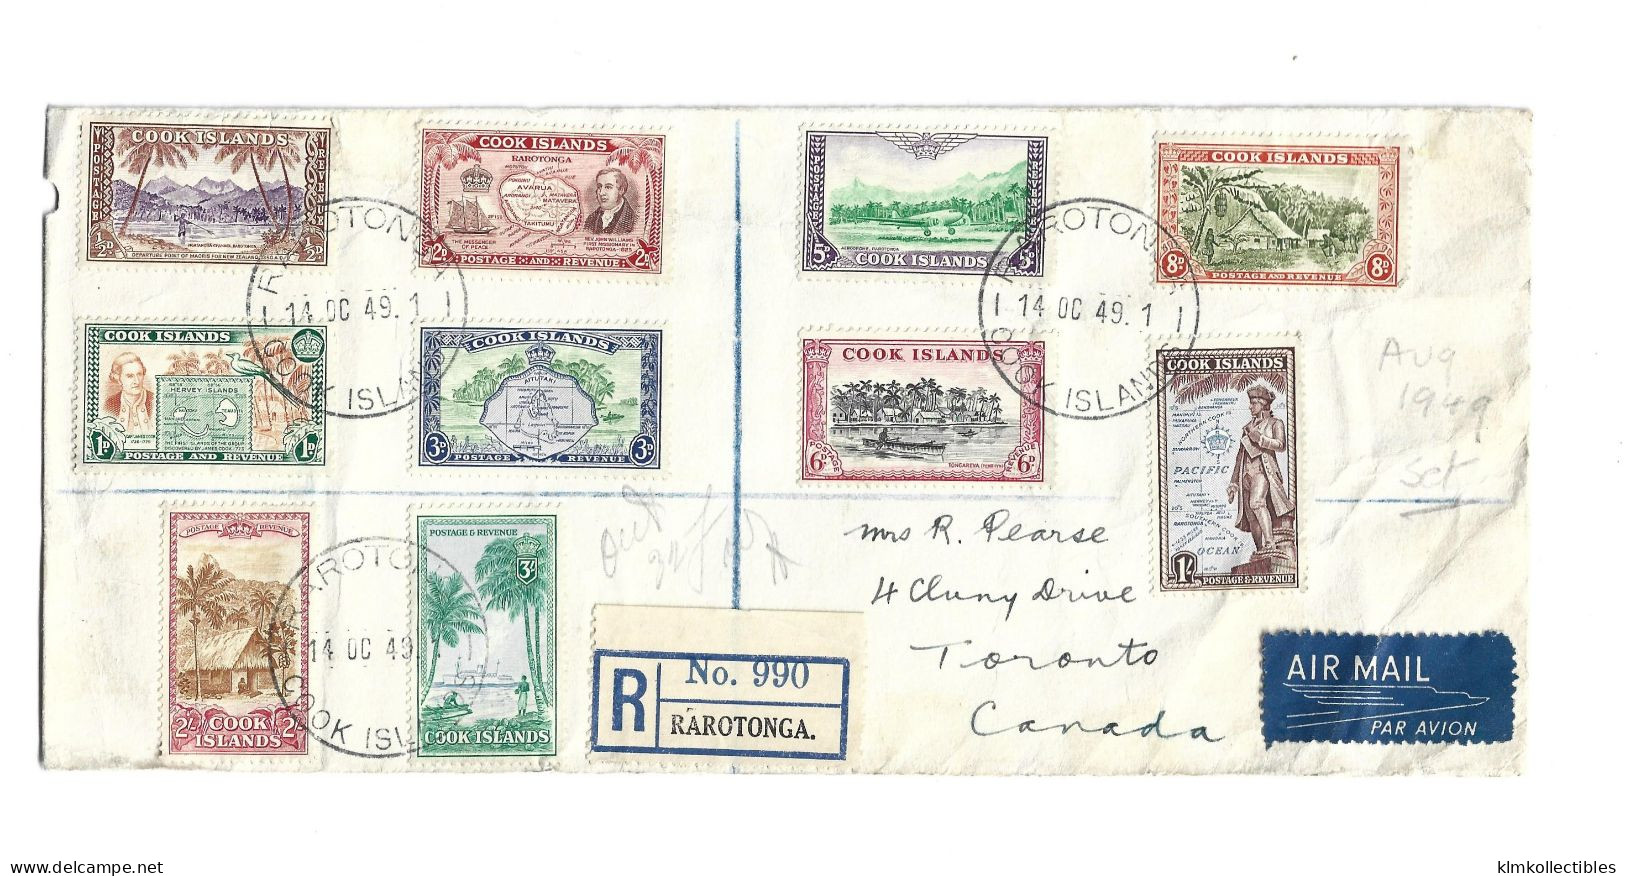 COOK ISLANDS NEW ZEALAND - 1949 FULL SET ON COVER FDC - REAL CIRCULATION TO CANADA - Cook